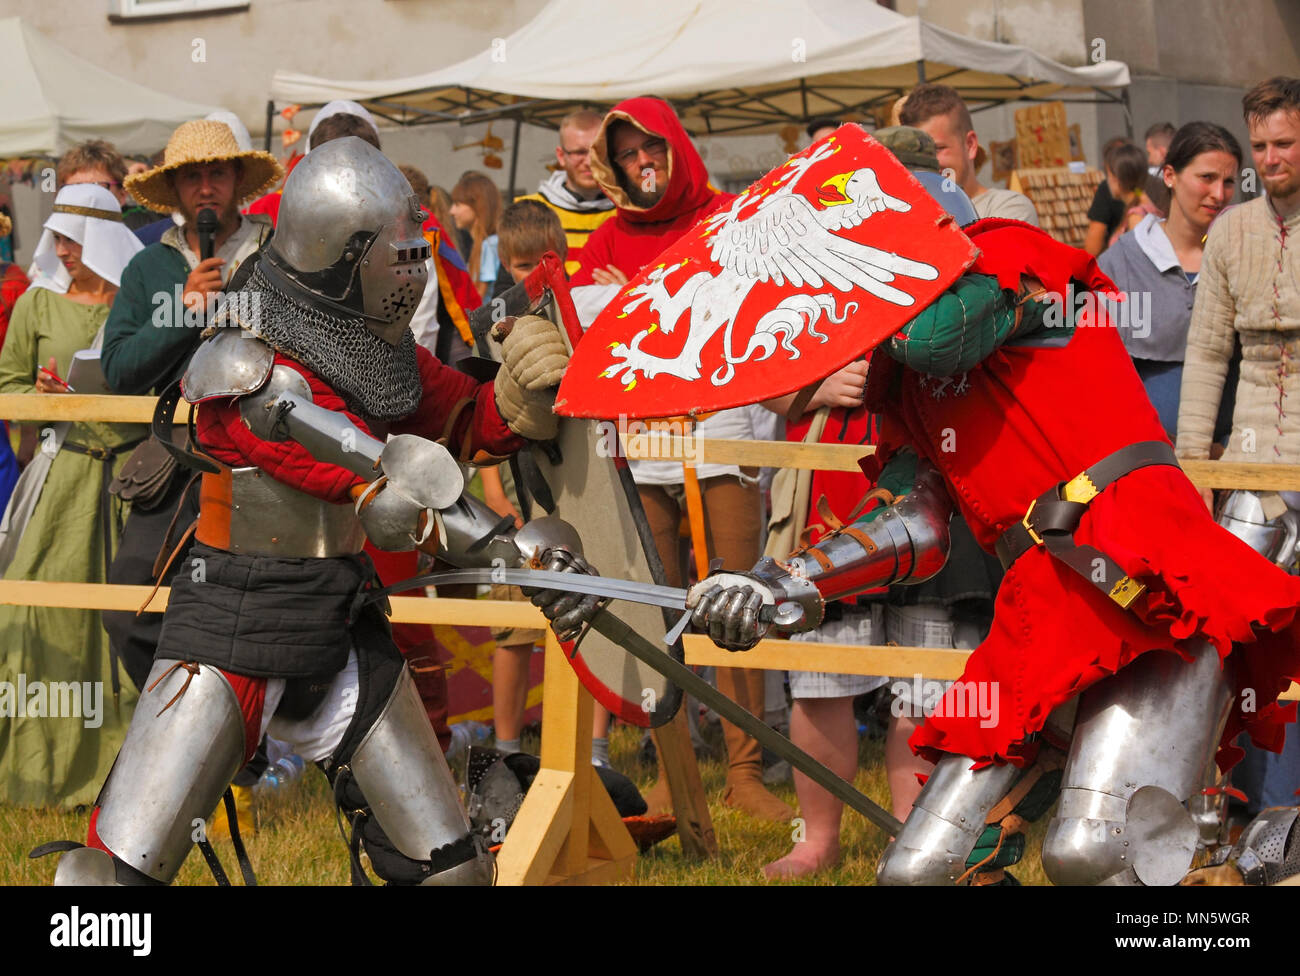 Fighting knight's. 'Knight's Tournament with Plum'. Szydlow, Poland, 23rd July 2017. Stock Photo